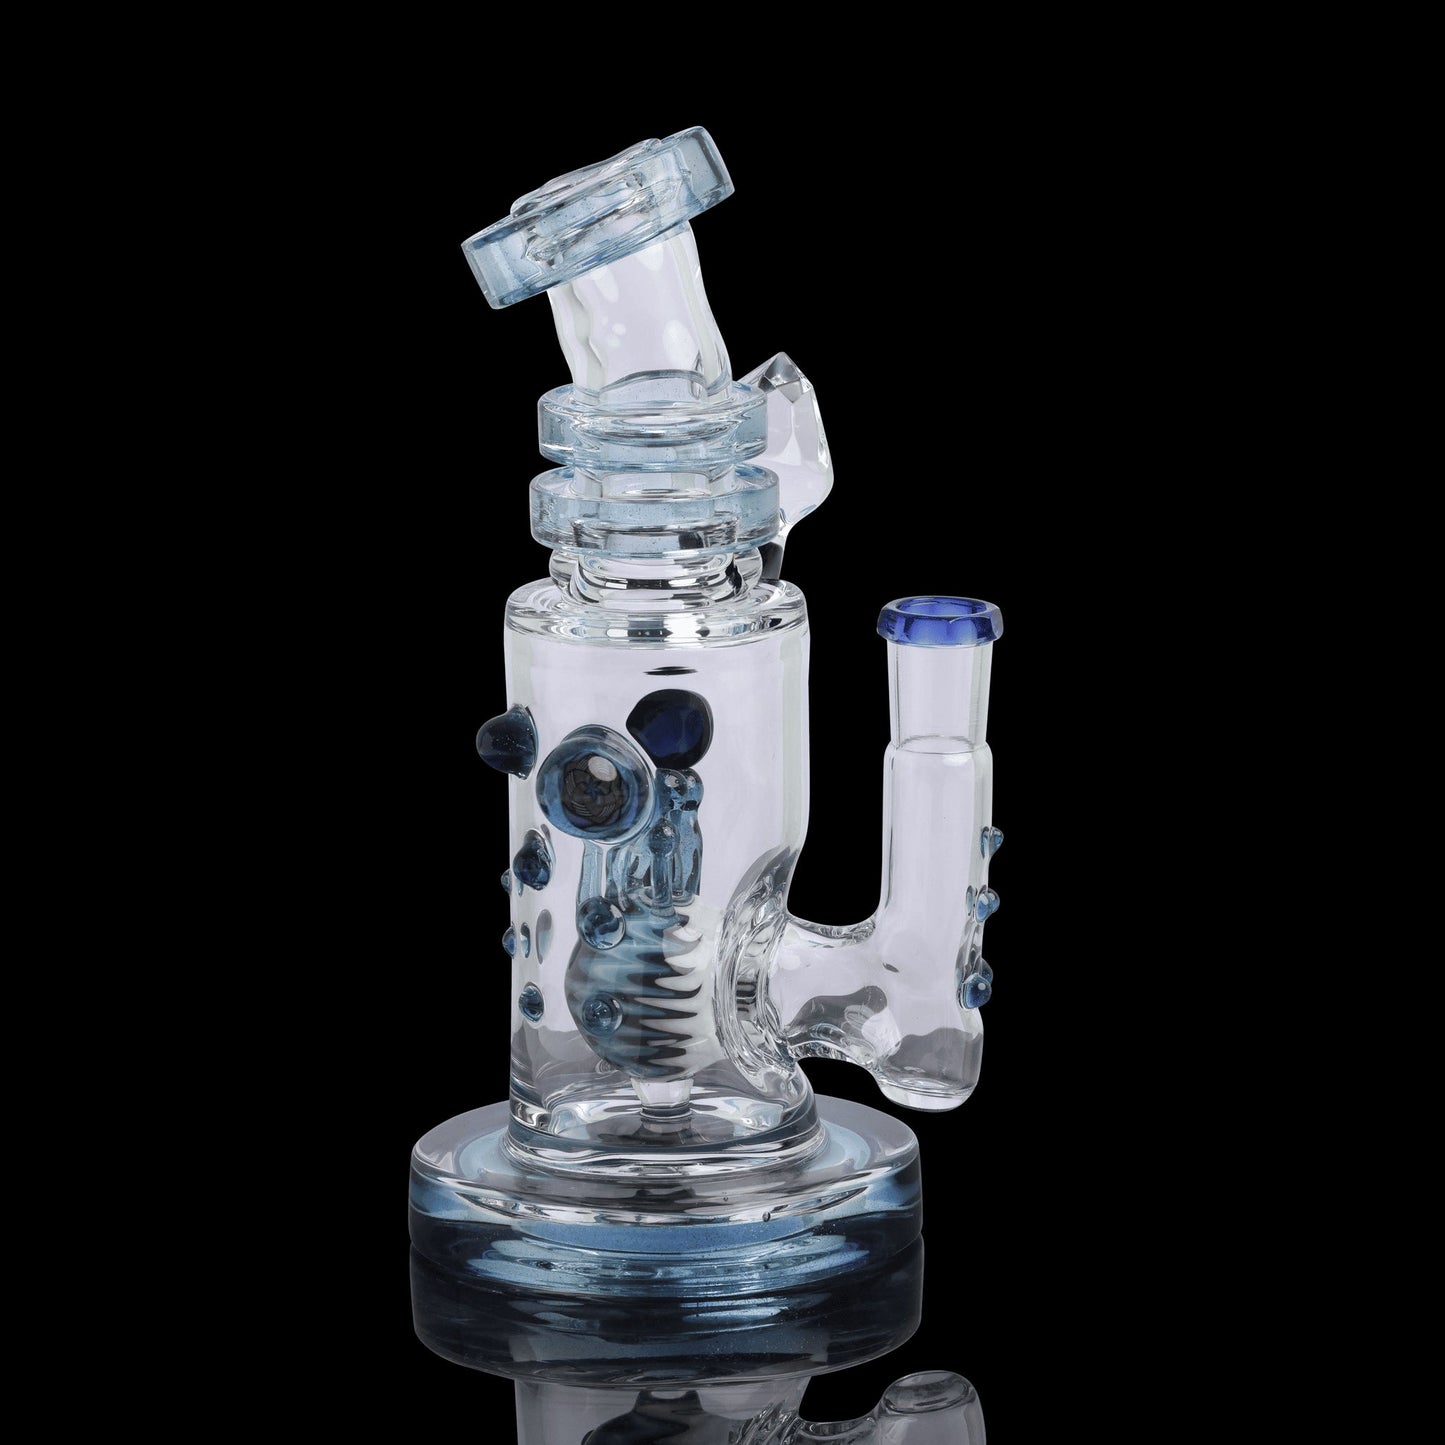 exquisite design of the Heady Facet Rig by Chris Hubbard